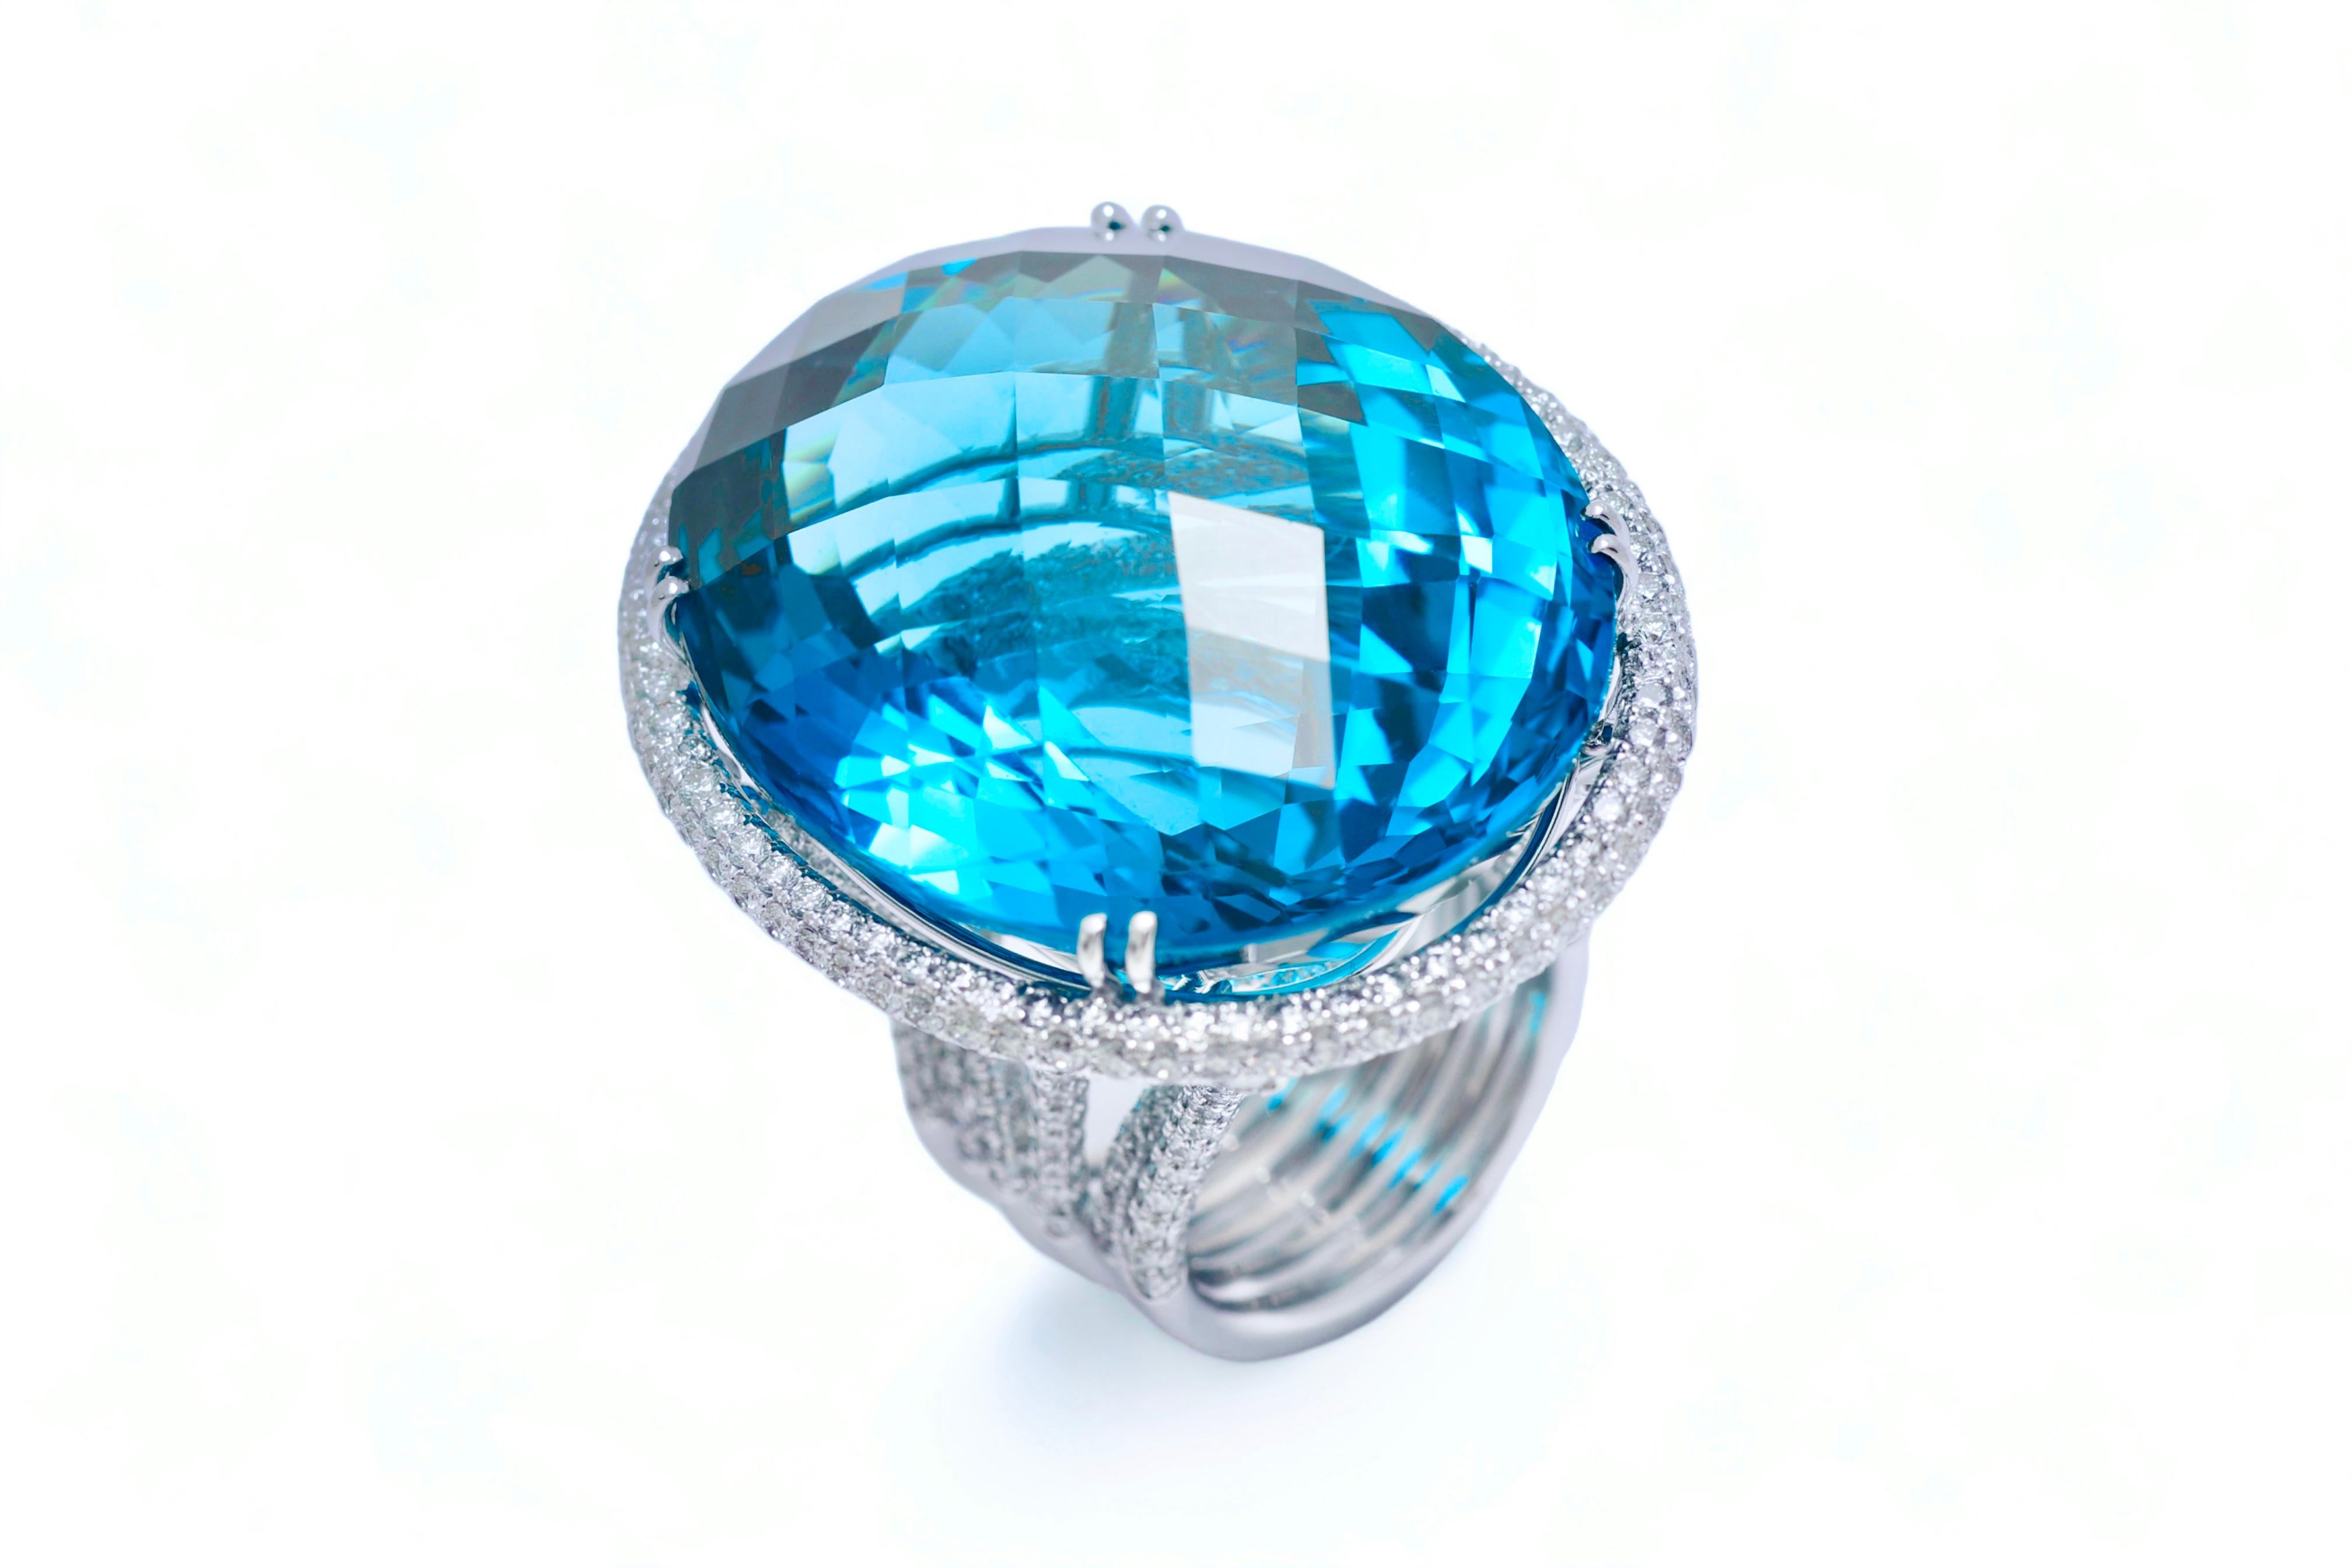 Magnificant 18 kt. White Gold Gigantic Cocktail Ring with 154 ct. London Blue Topaz & 8.72 ct. Diamonds

Diamonds: brilliant cut diamonds together 8.78 ct. diamonds

Topaz: Massive London blue topaz stone of 153.98 ct.

Material: 18 kt. white